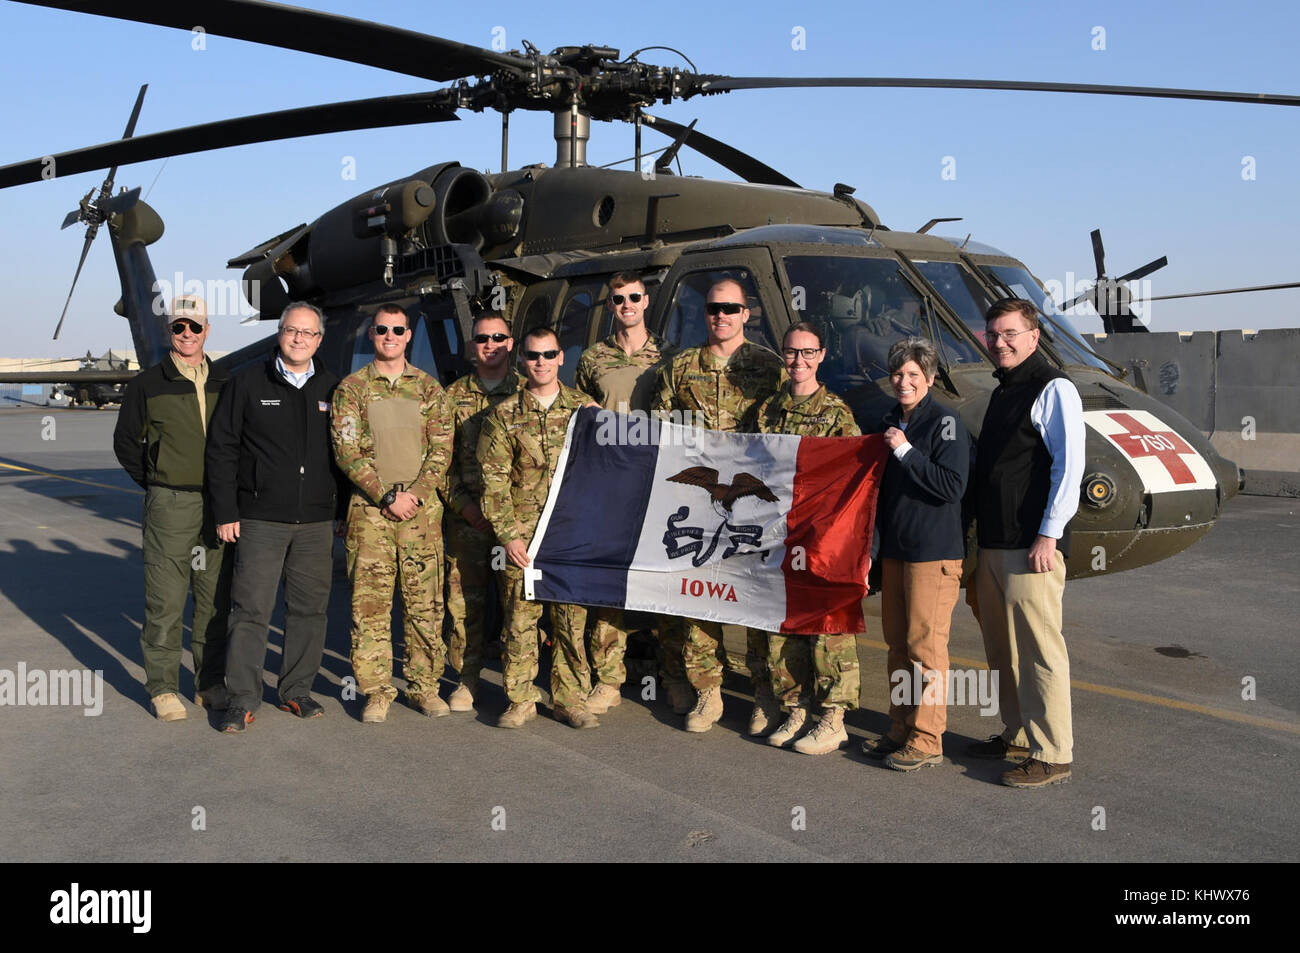 Senator Joni Ernst, Senate Armed Services Committee, visited with Soldiers of Task Force Marauder in Afghanistan Nov. 18, 2017, and received a briefing on the mission of the task force while deployed, focusing primarily on the MEDEVAC assets provided by the Iowa National Guard, Det. 1, C Co., 2-211th General Support Aviation Battalion. Task Force Marauder is made up of Soldiers from South Carolina National Guard, Illinois National Guard, Iowa National Guard, as well as active duty component and provides aviation capabilities with AH64 Apaches, UH60 Black Hawks, CH47 Chinooks, and MEDEVAC asset Stock Photo